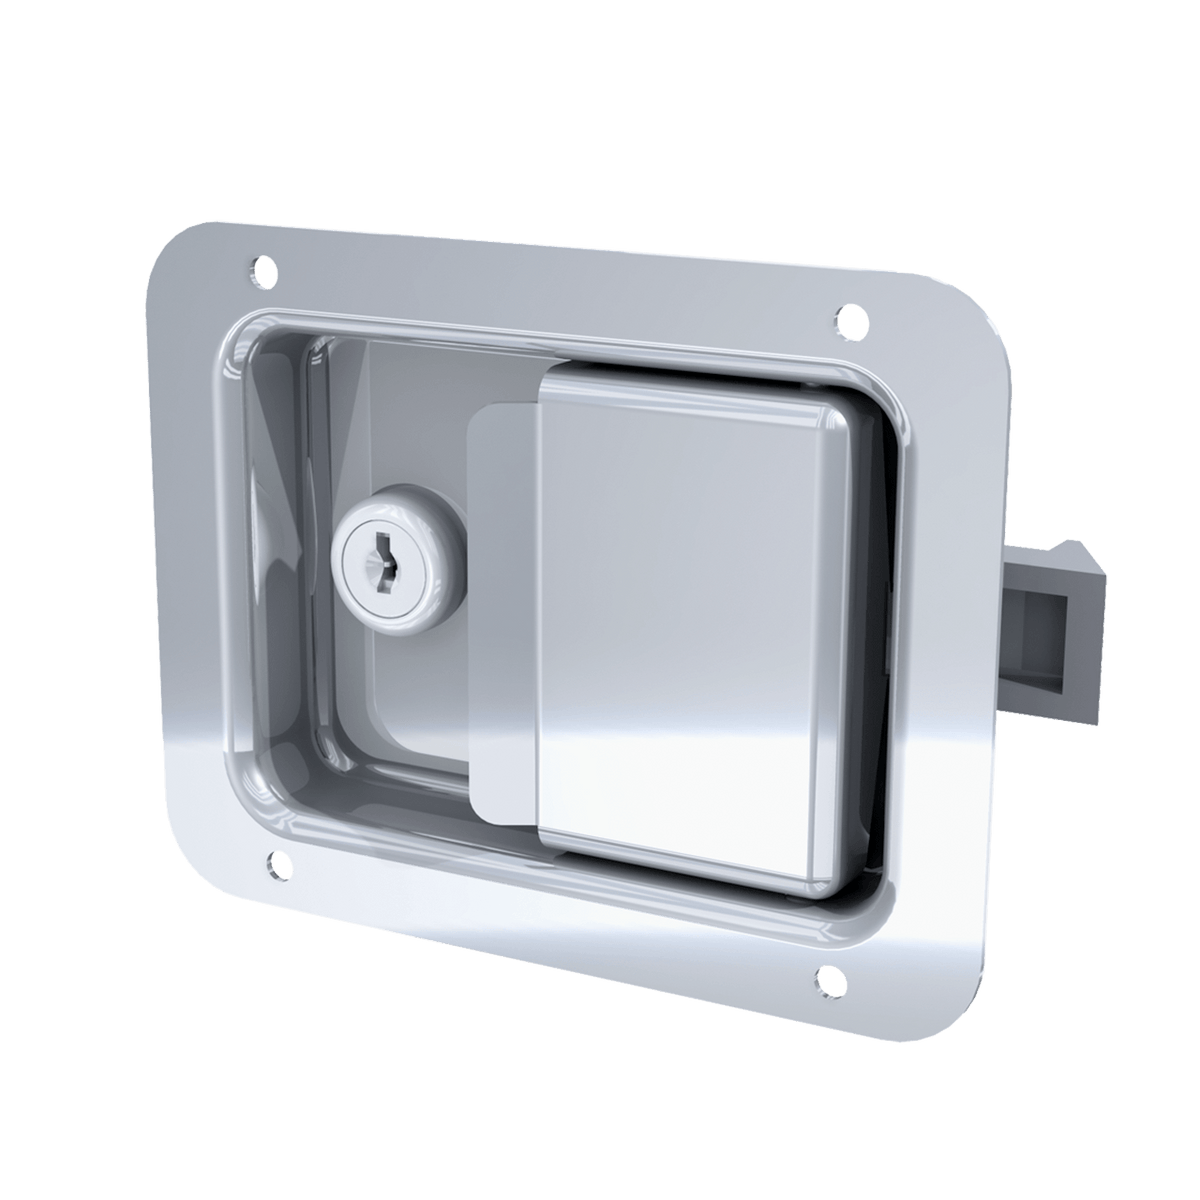 Key lockable Stainless Steel Paddle Latch with CH510 Key